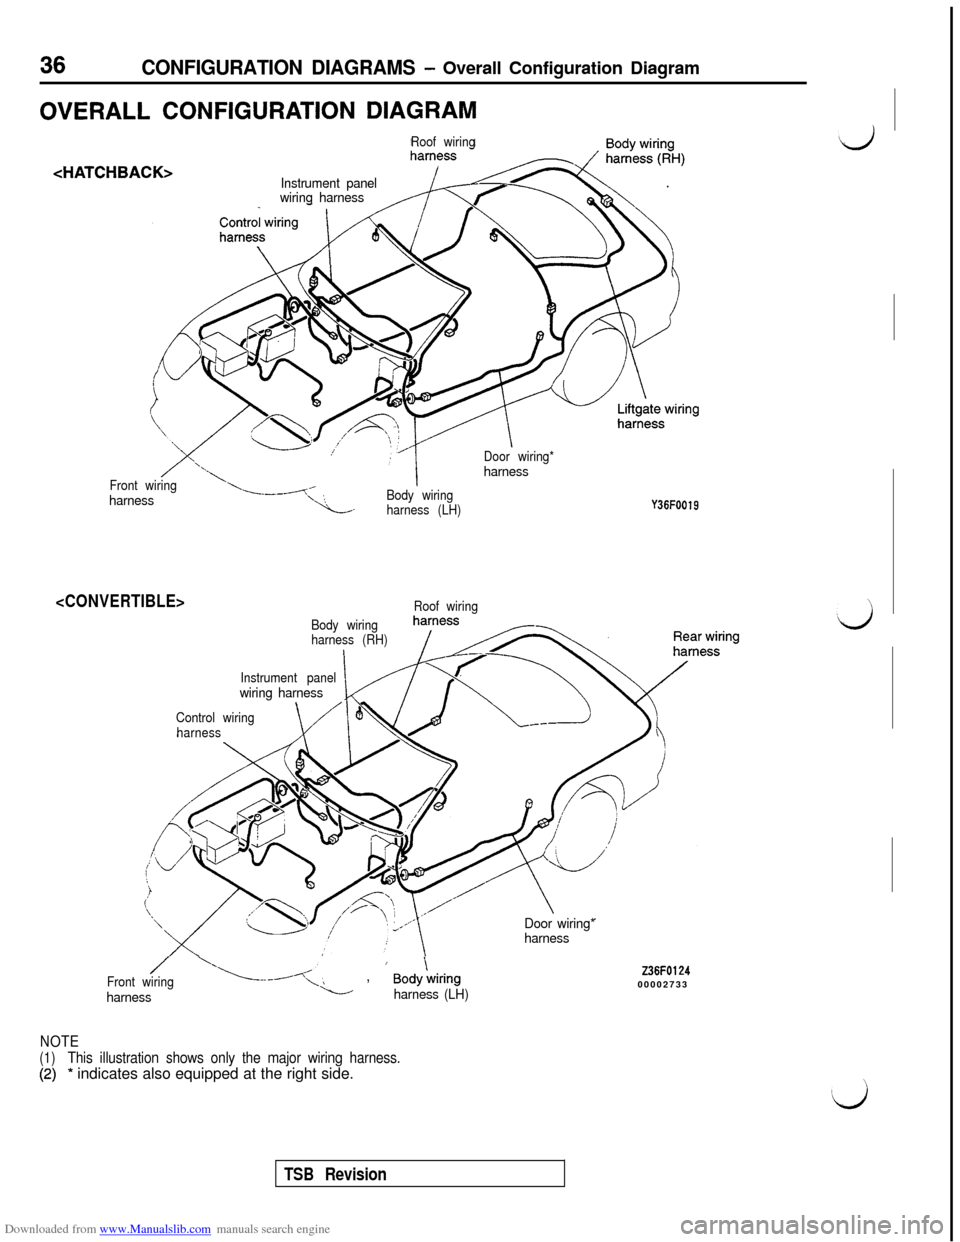 MITSUBISHI 3000GT 1992 2.G Workshop Manual Downloaded from www.Manualslib.com manuals search engine 36CONFIGURATION DIAGRAMS - Overall Configuration Diagram
OVERALL CONFIGURATION DIAGRAM
<HAT1
Roof wiring
CHBACK>Instrument panel
wiring harness